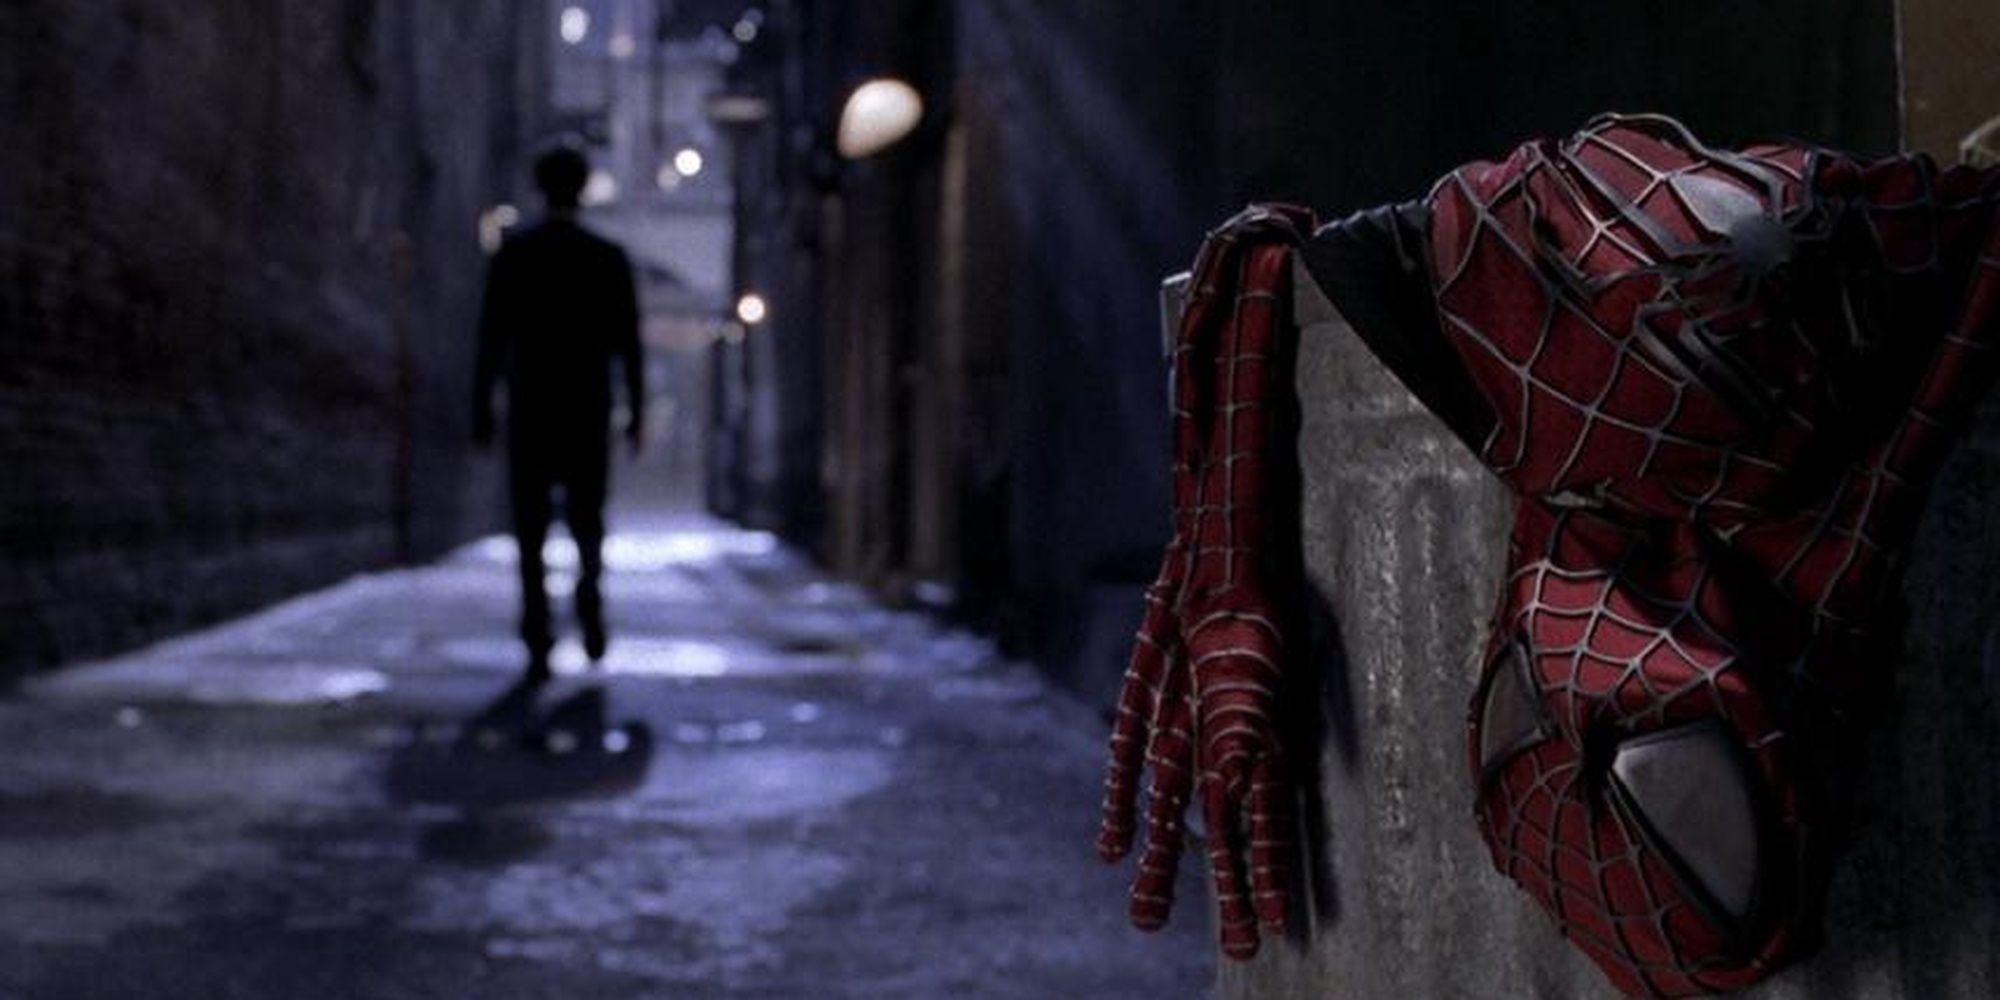 Peter walking away from his discarded costume